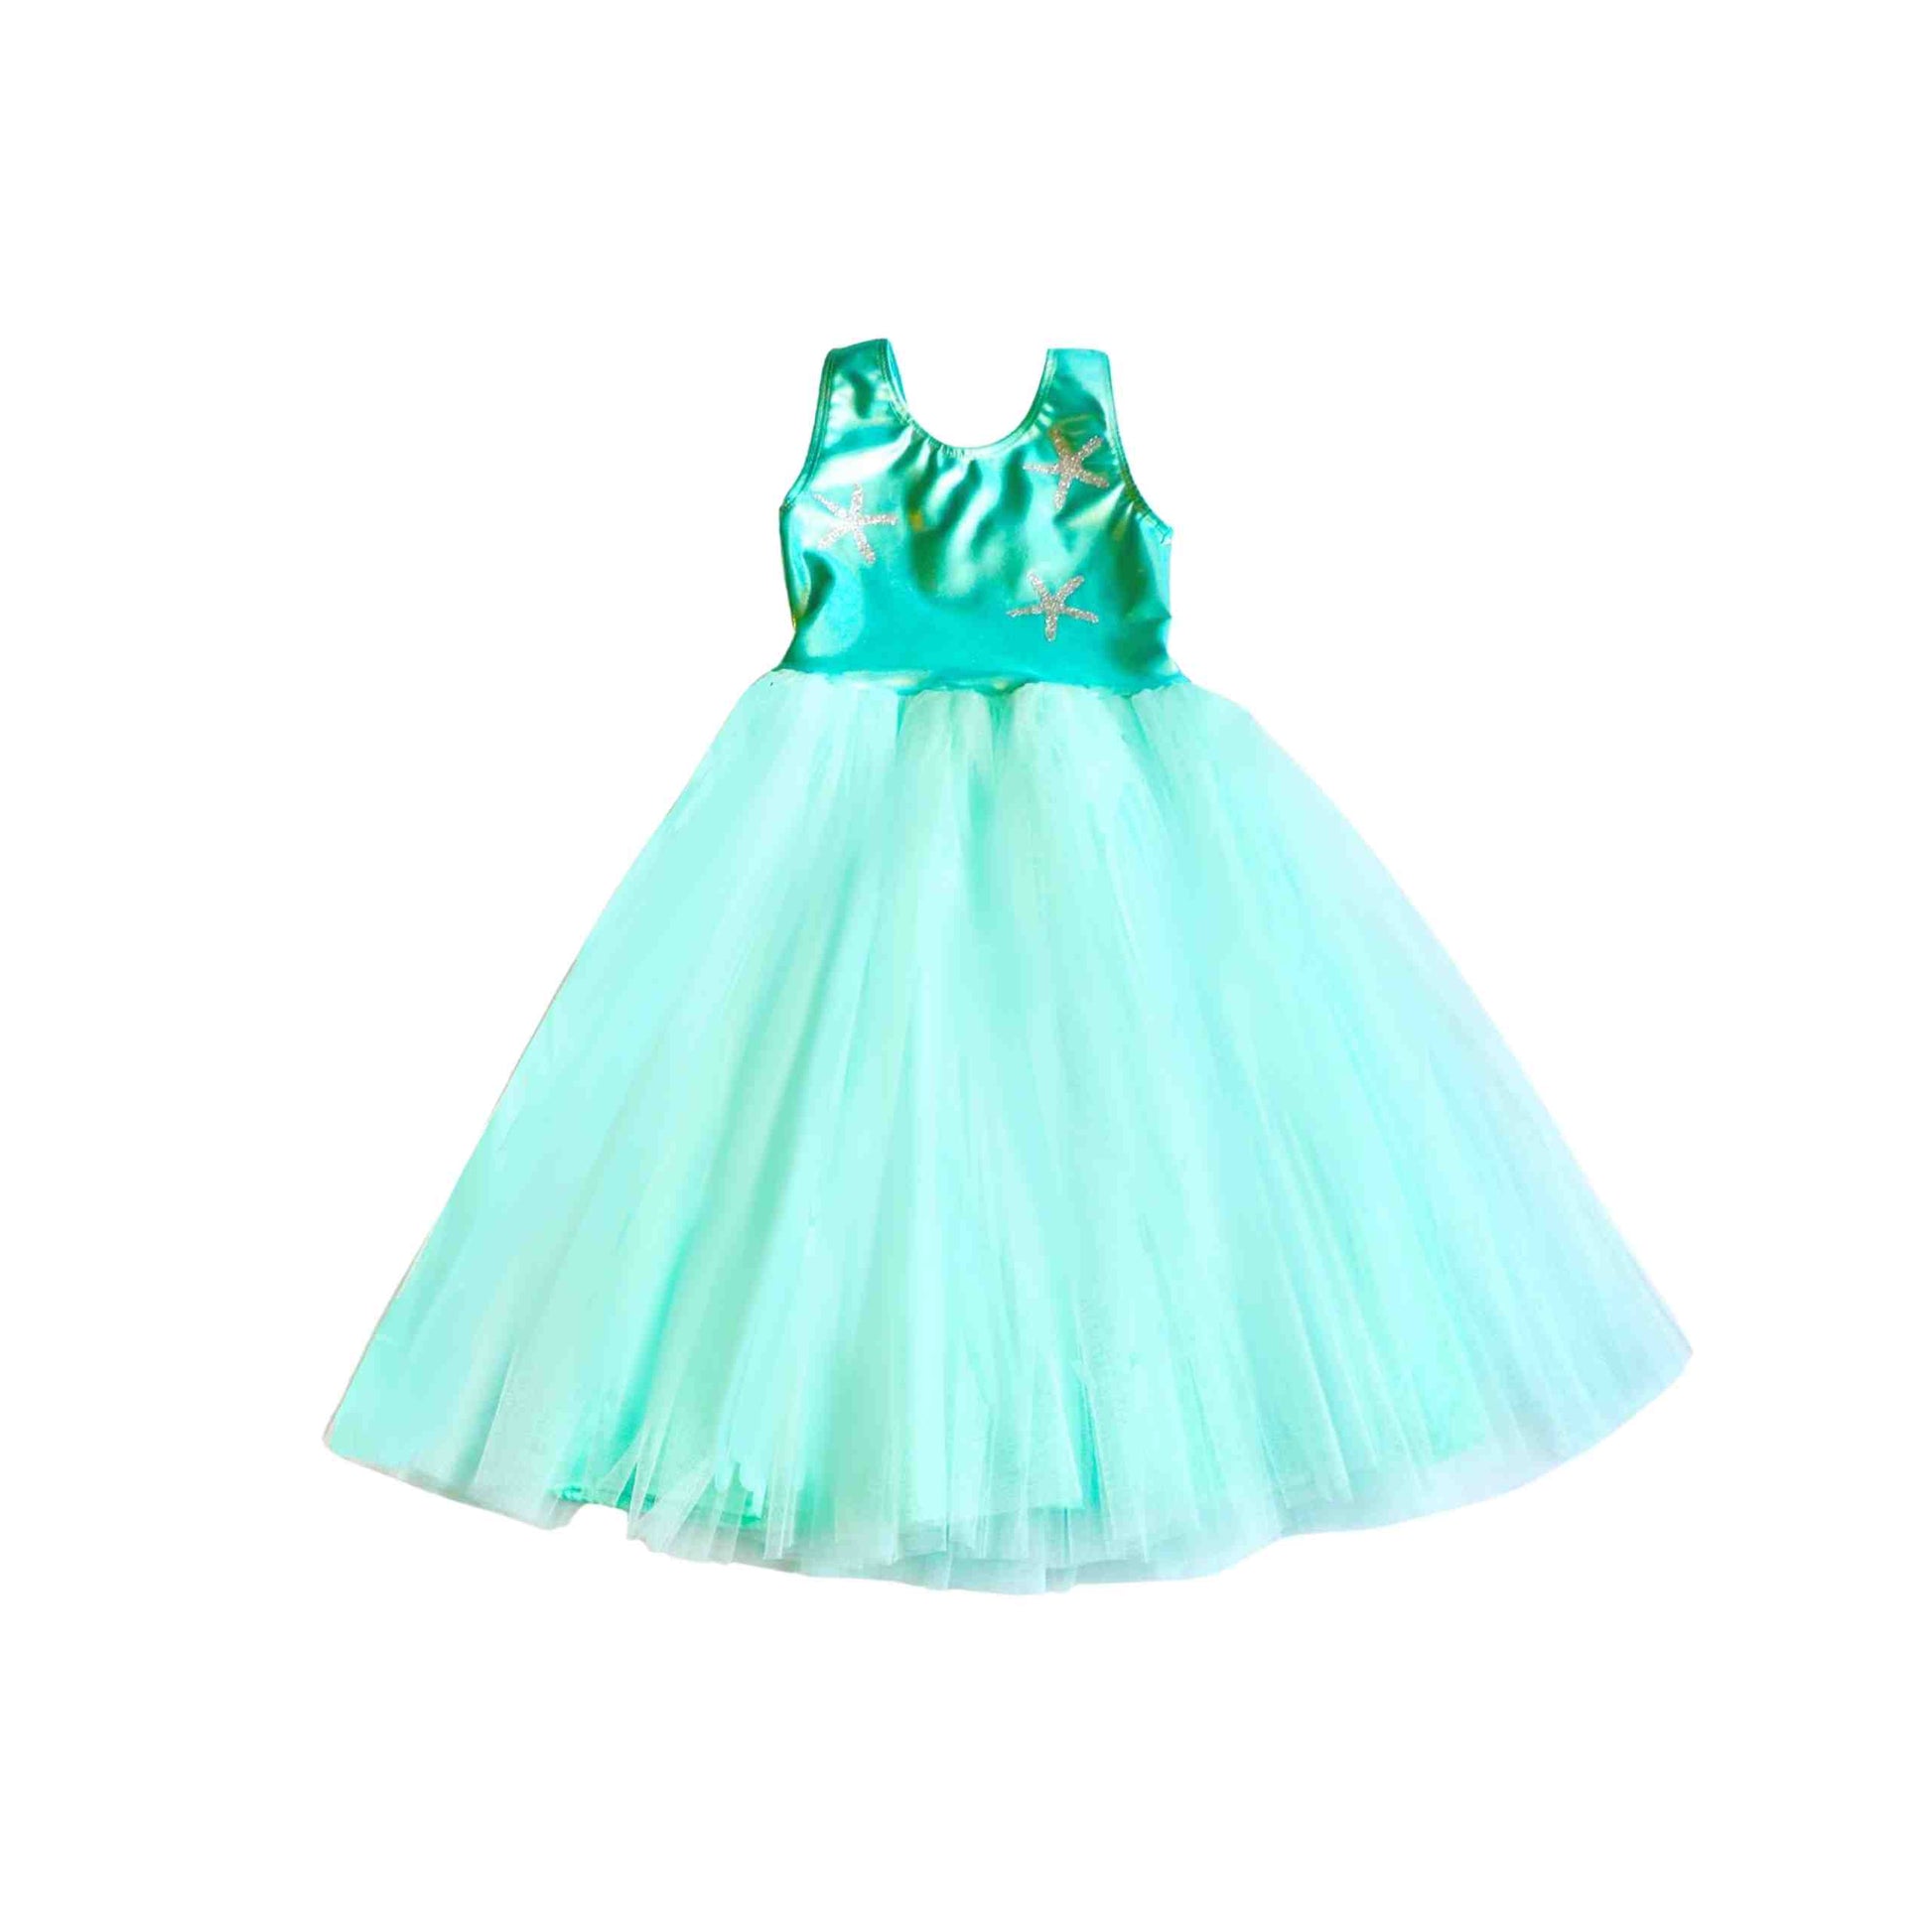 a little girl wearing a green dress on a white background